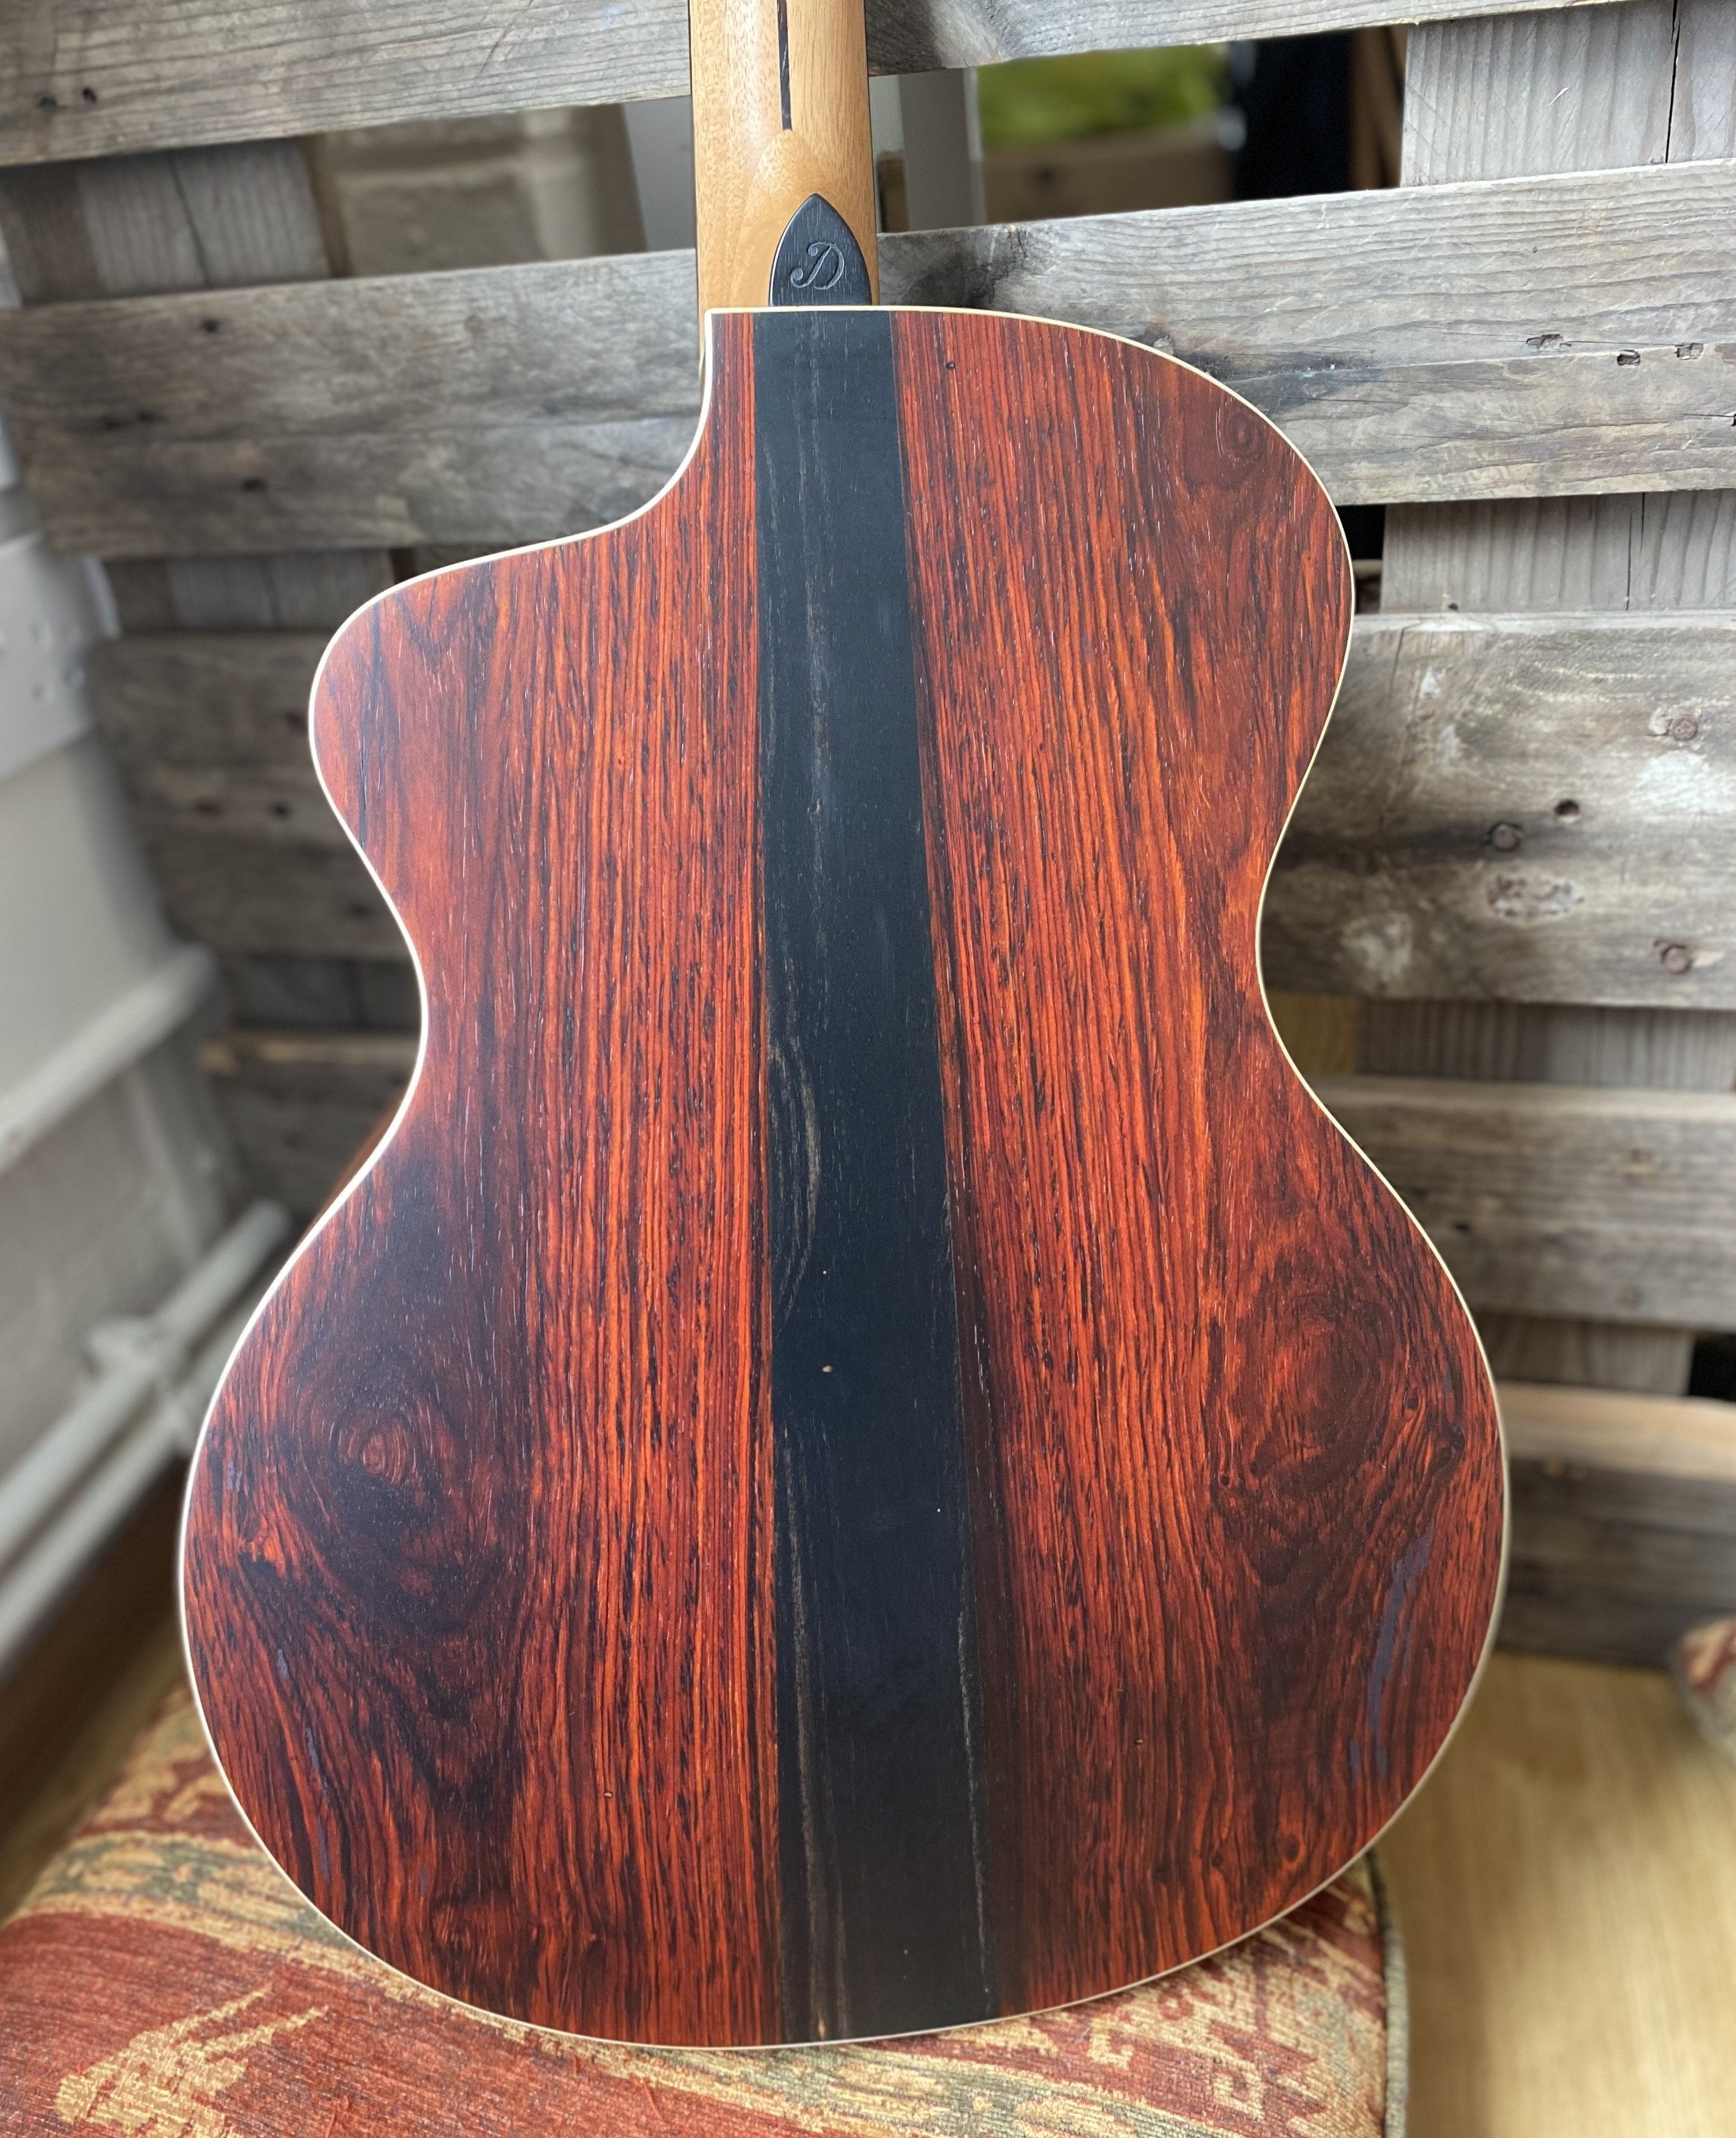 Dowina Cocobolo Trio Plate (Cocobolo III) GAC, Acoustic Guitar for sale at Richards Guitars.